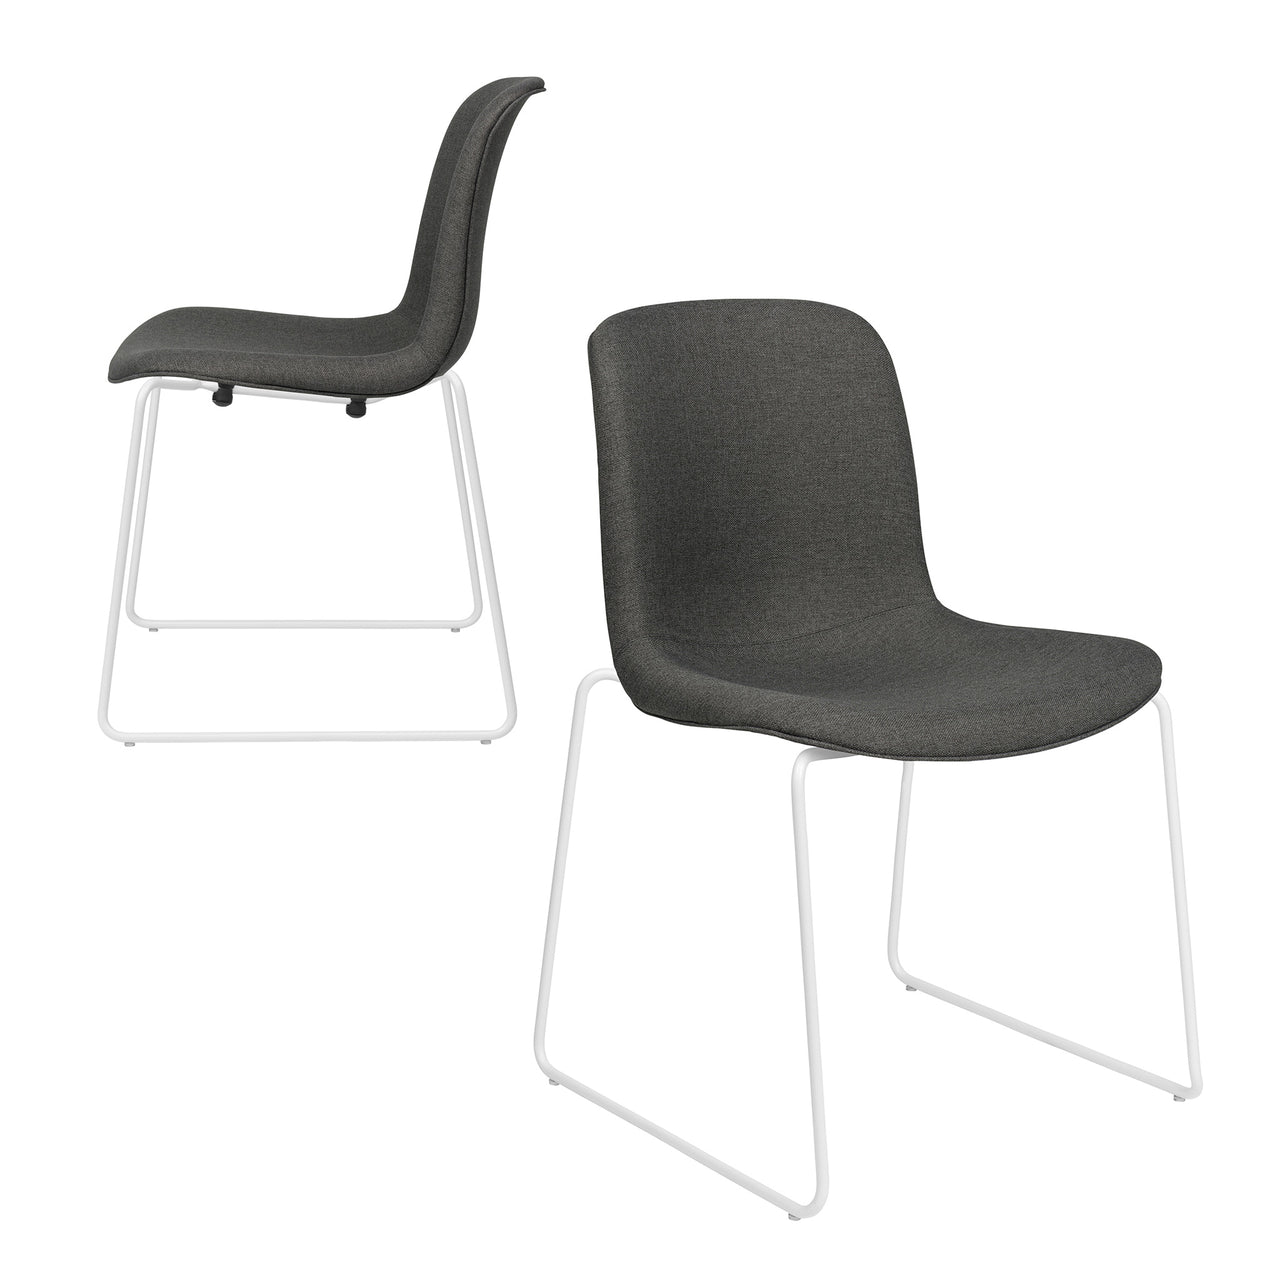 Murray Stackable Side Chairs, Sled Base, Set of 2 (Charcoal Fabric)